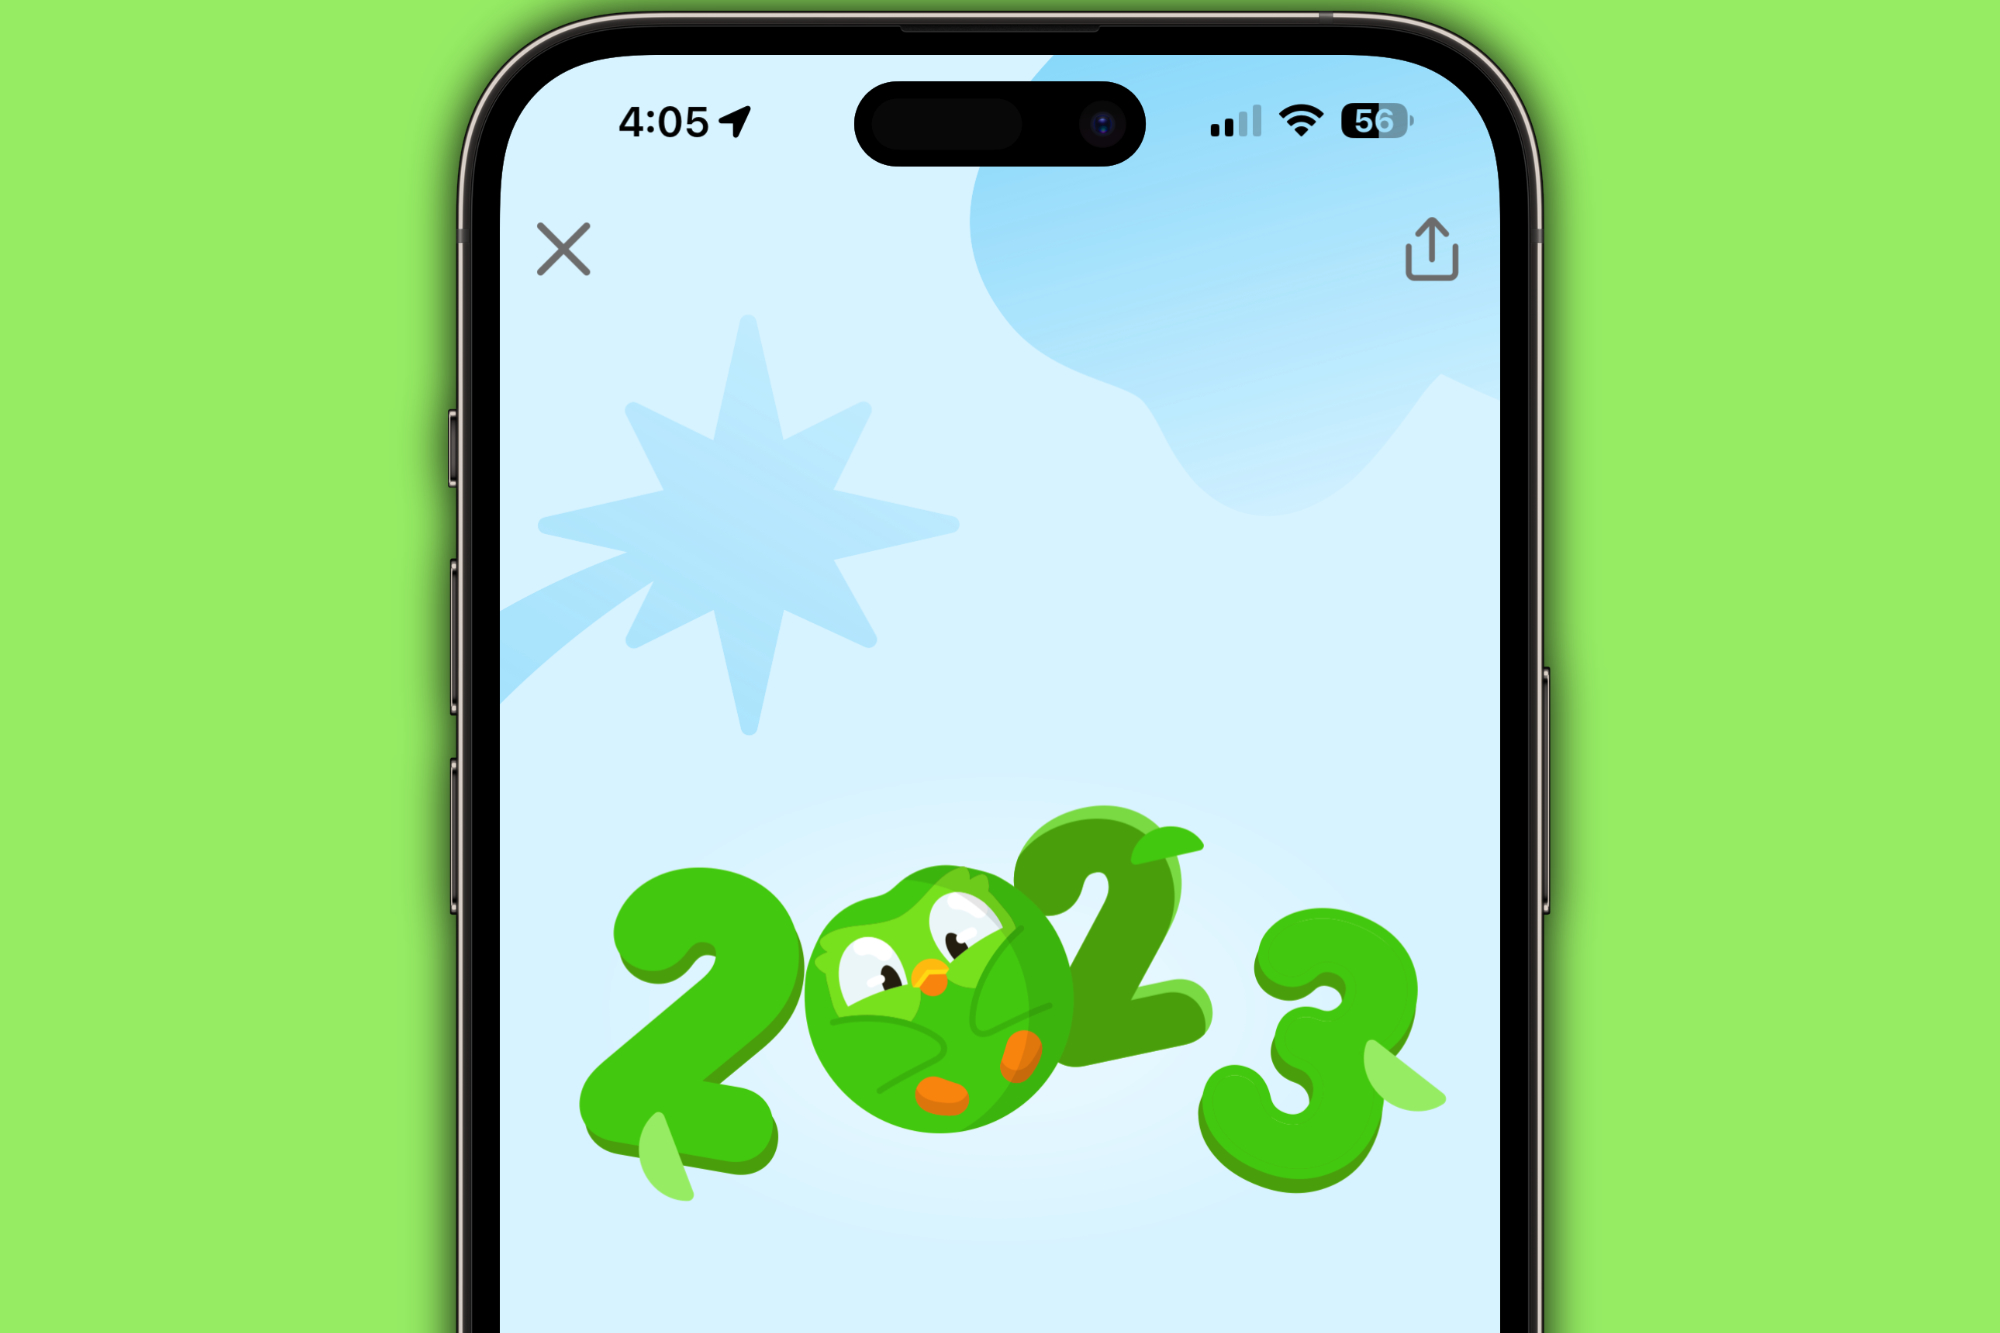 Duolingo 2023 Year in Review running on an iPhone.